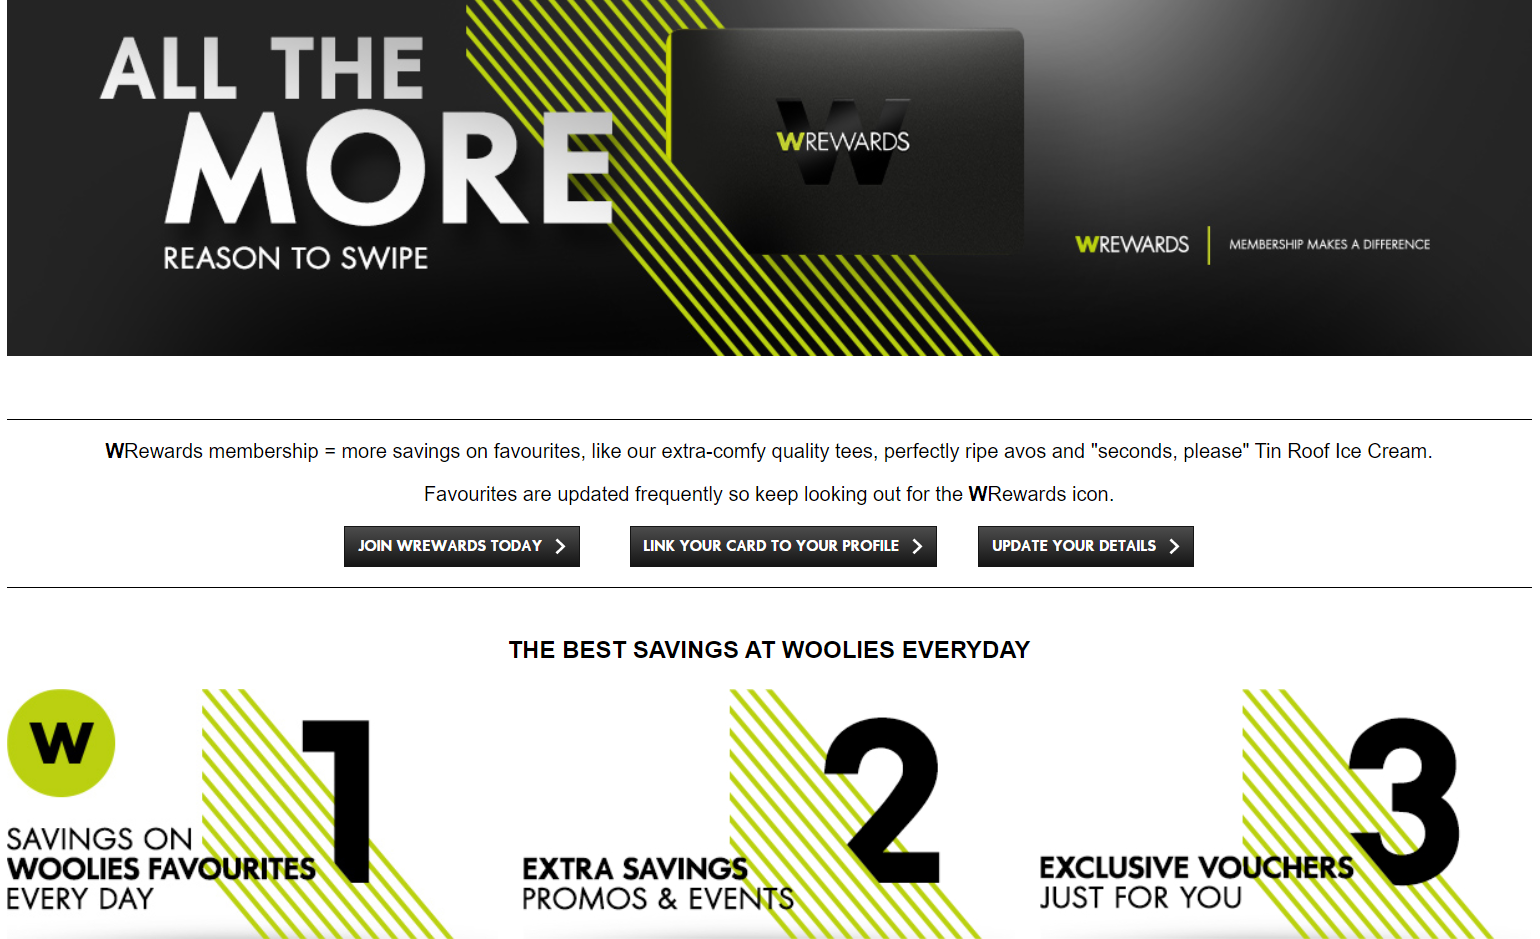 The loyalty program page for Woolworth